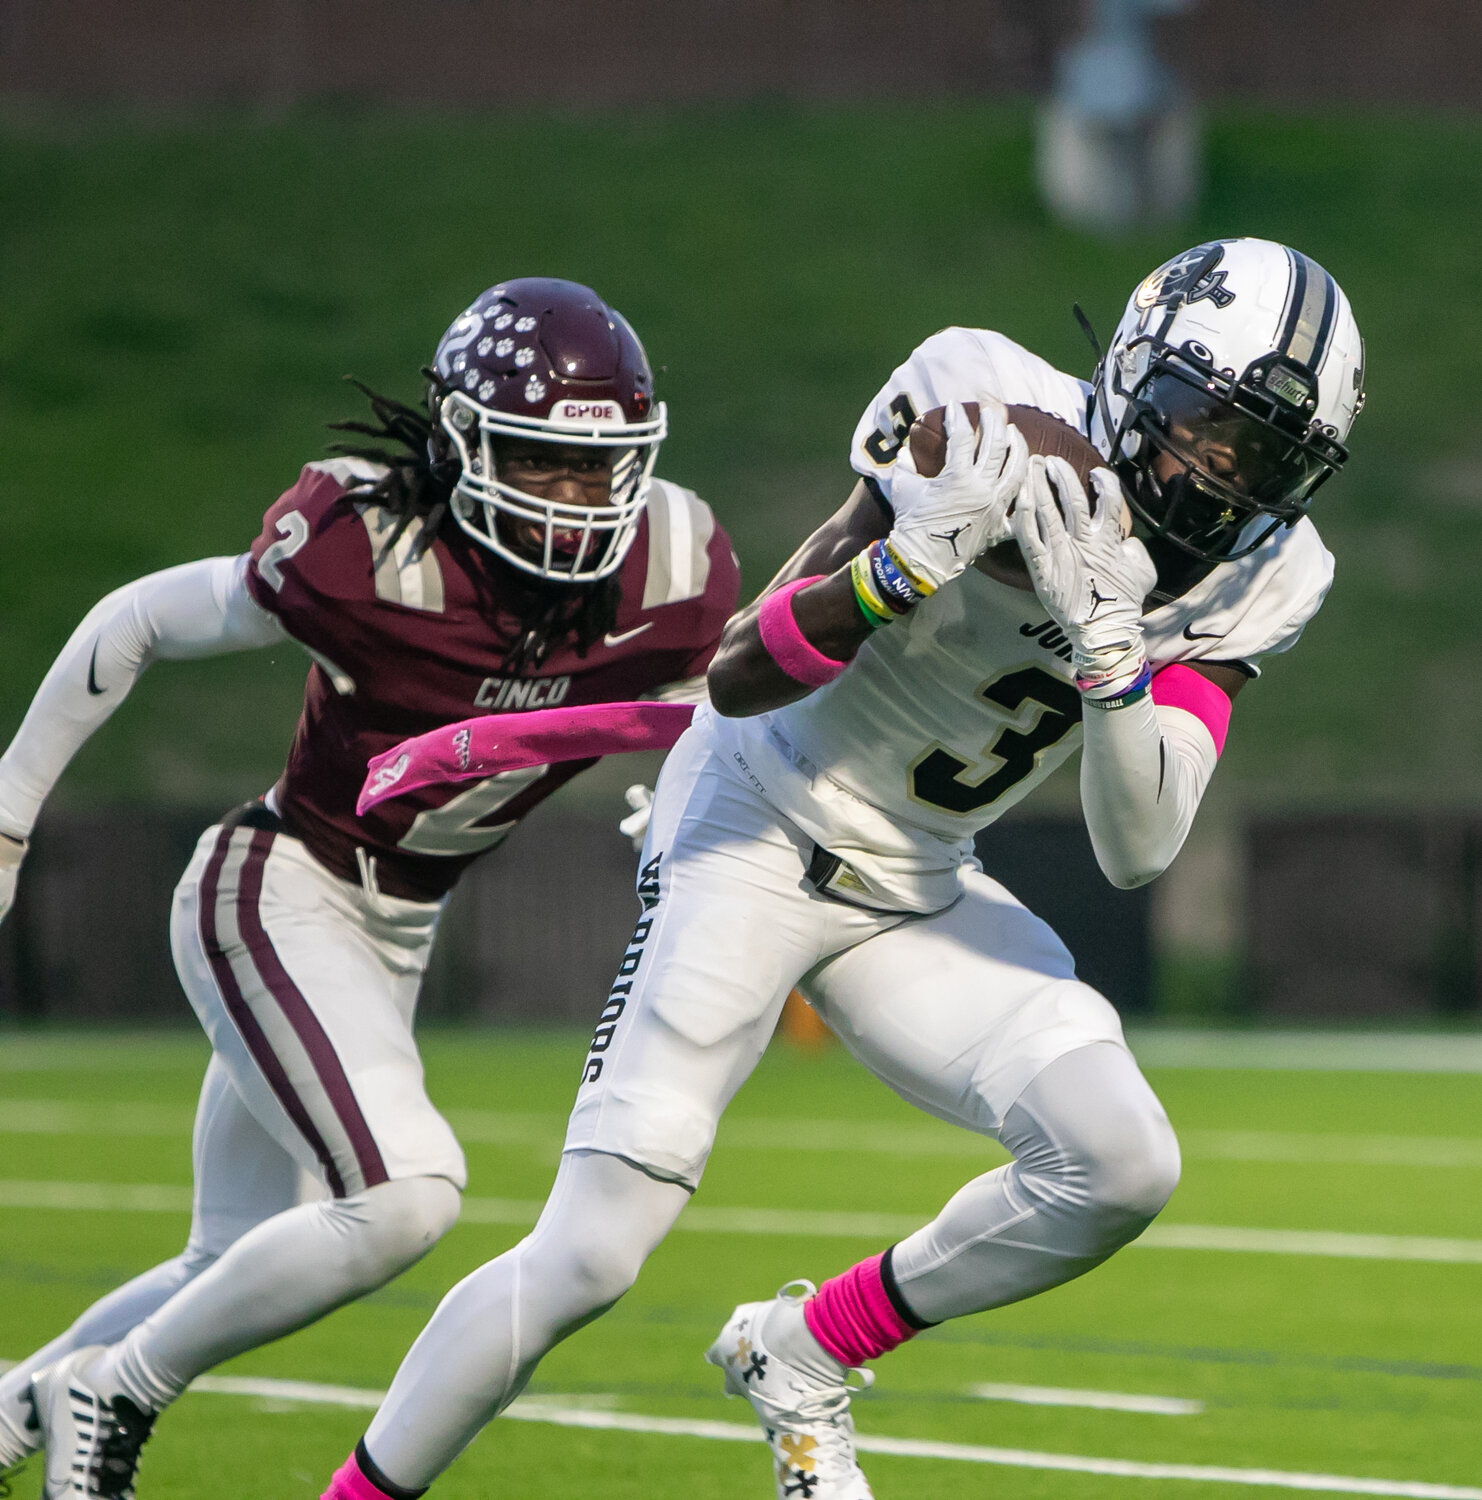 Andrew Marsh catches a pass during Friday's game between Jordan and Cinco Ranch at Rhodes Stadium.